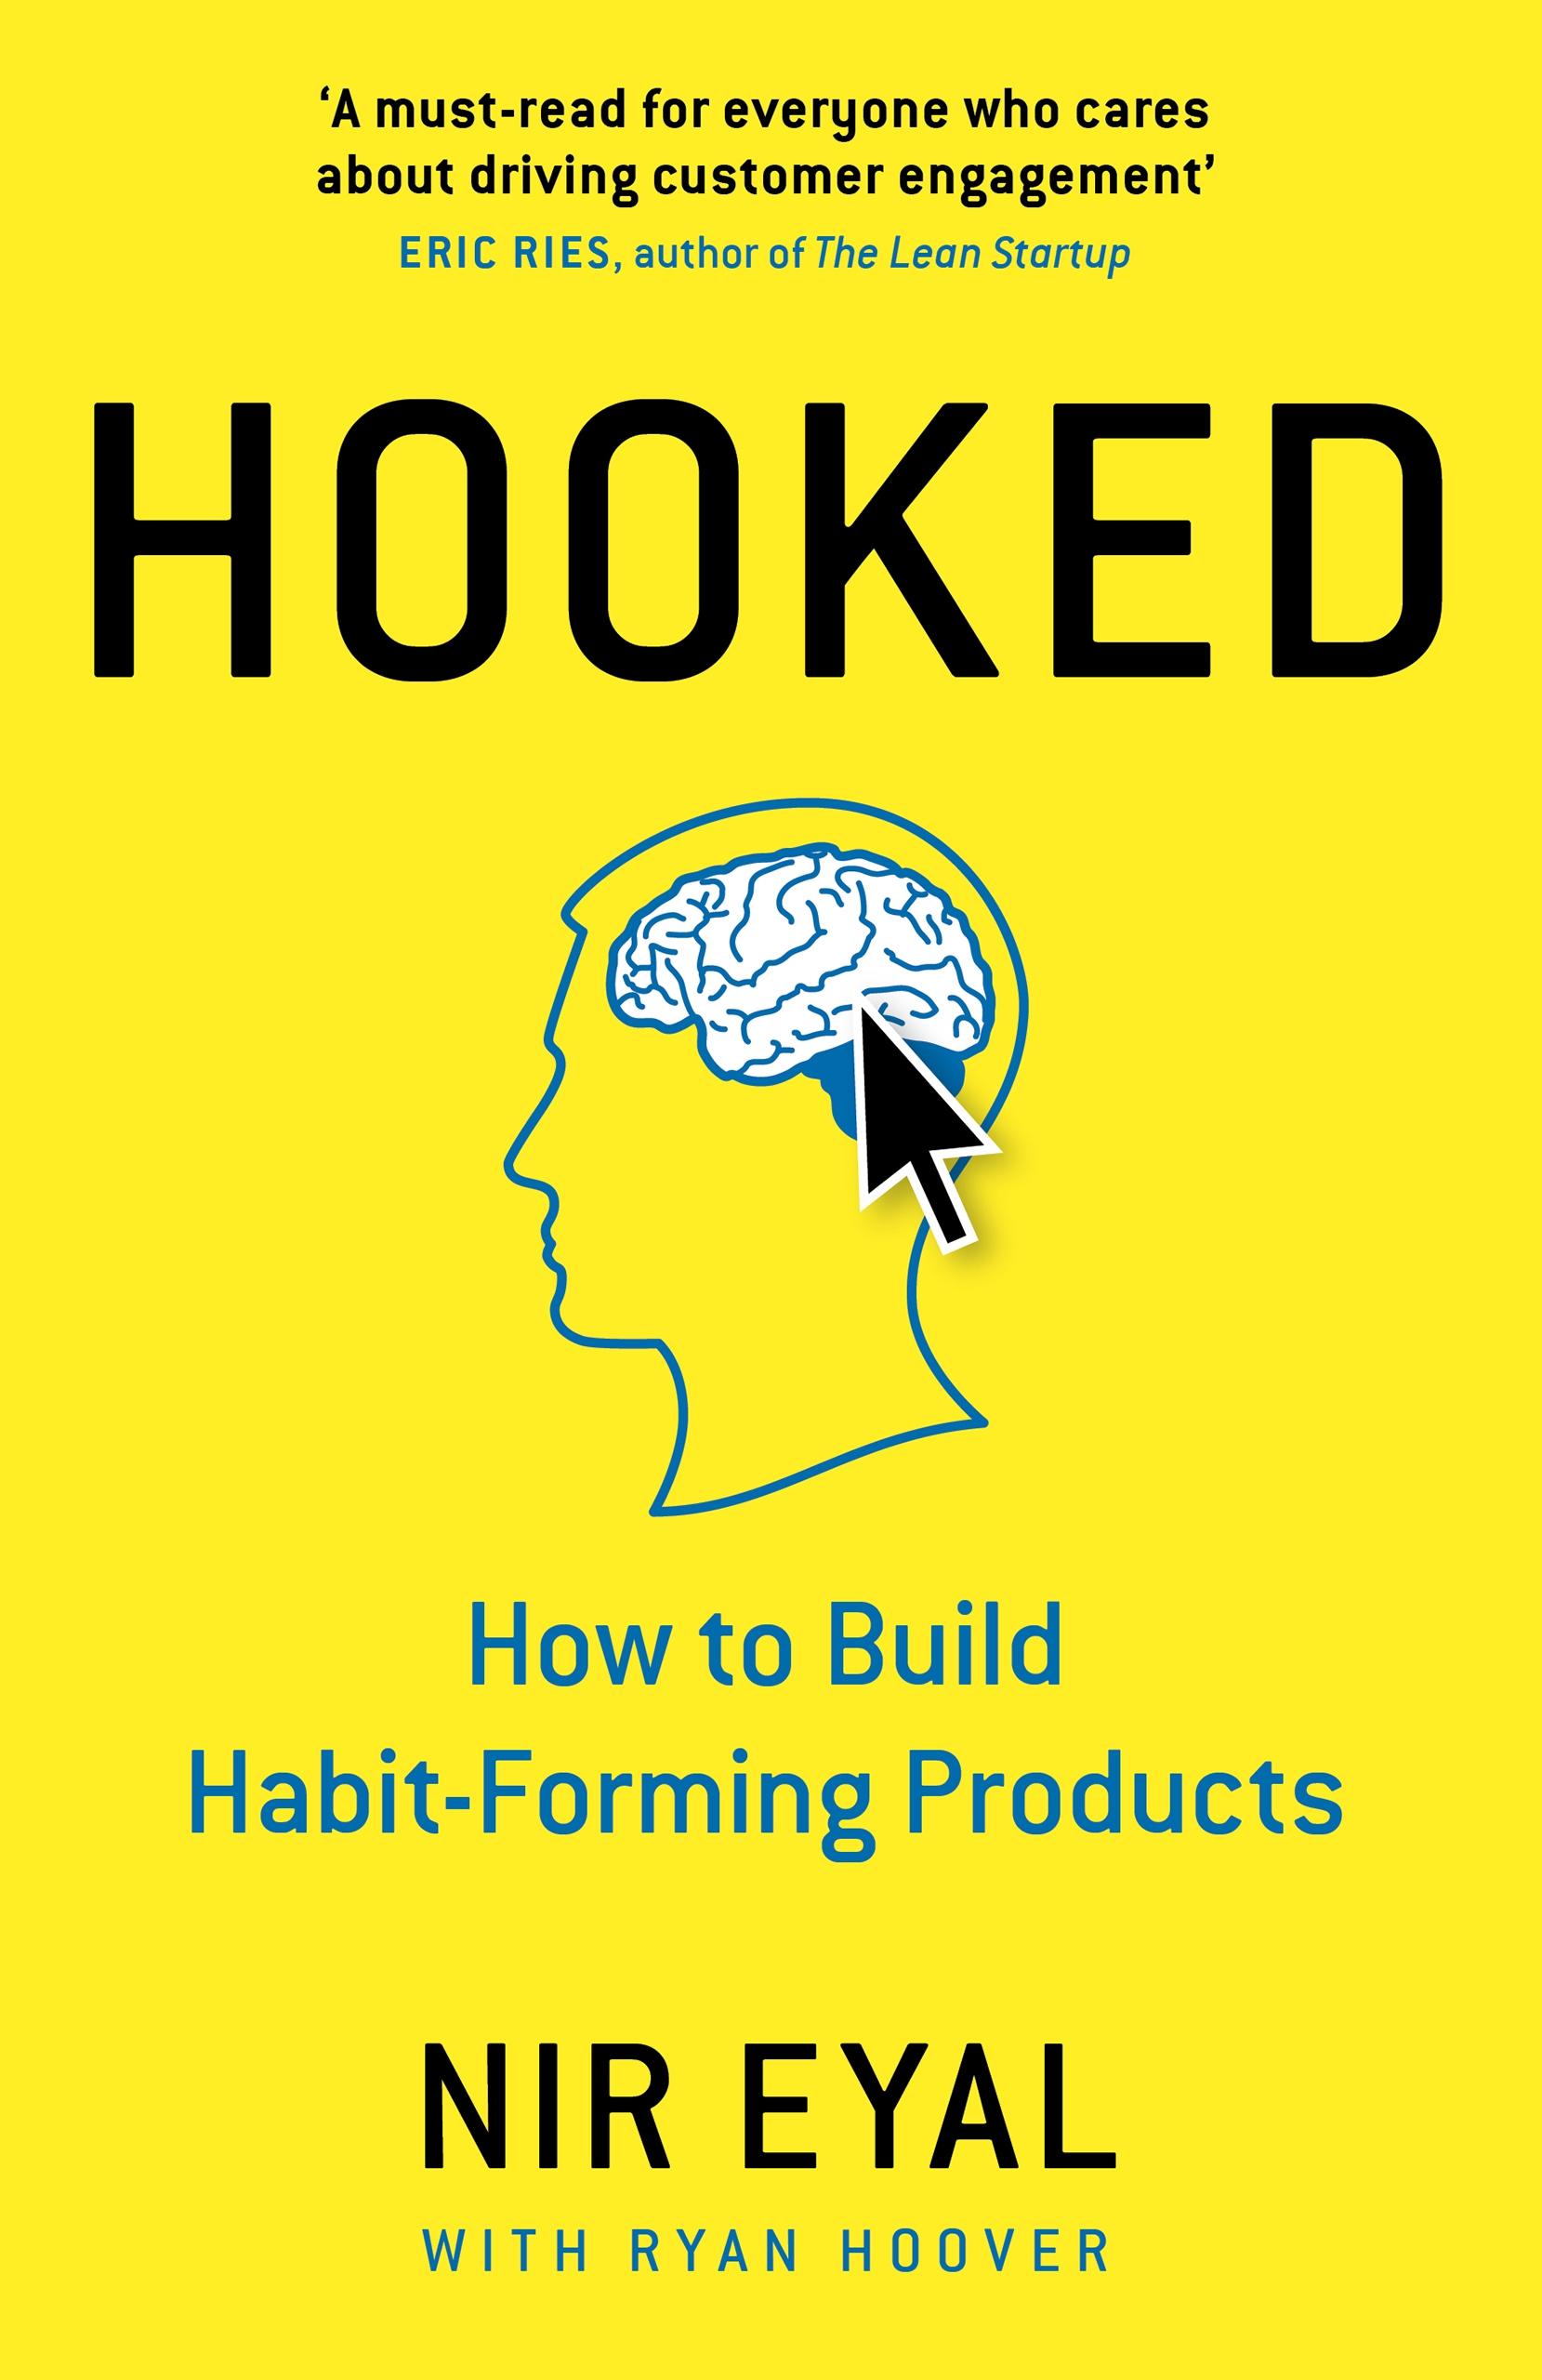 Hooked | How to Build Habit-Forming Products | Nir Eyal | Buch | 242 S. | Englisch | 2014 | Penguin Books Ltd (UK) | EAN 9780241184837 - Eyal, Nir